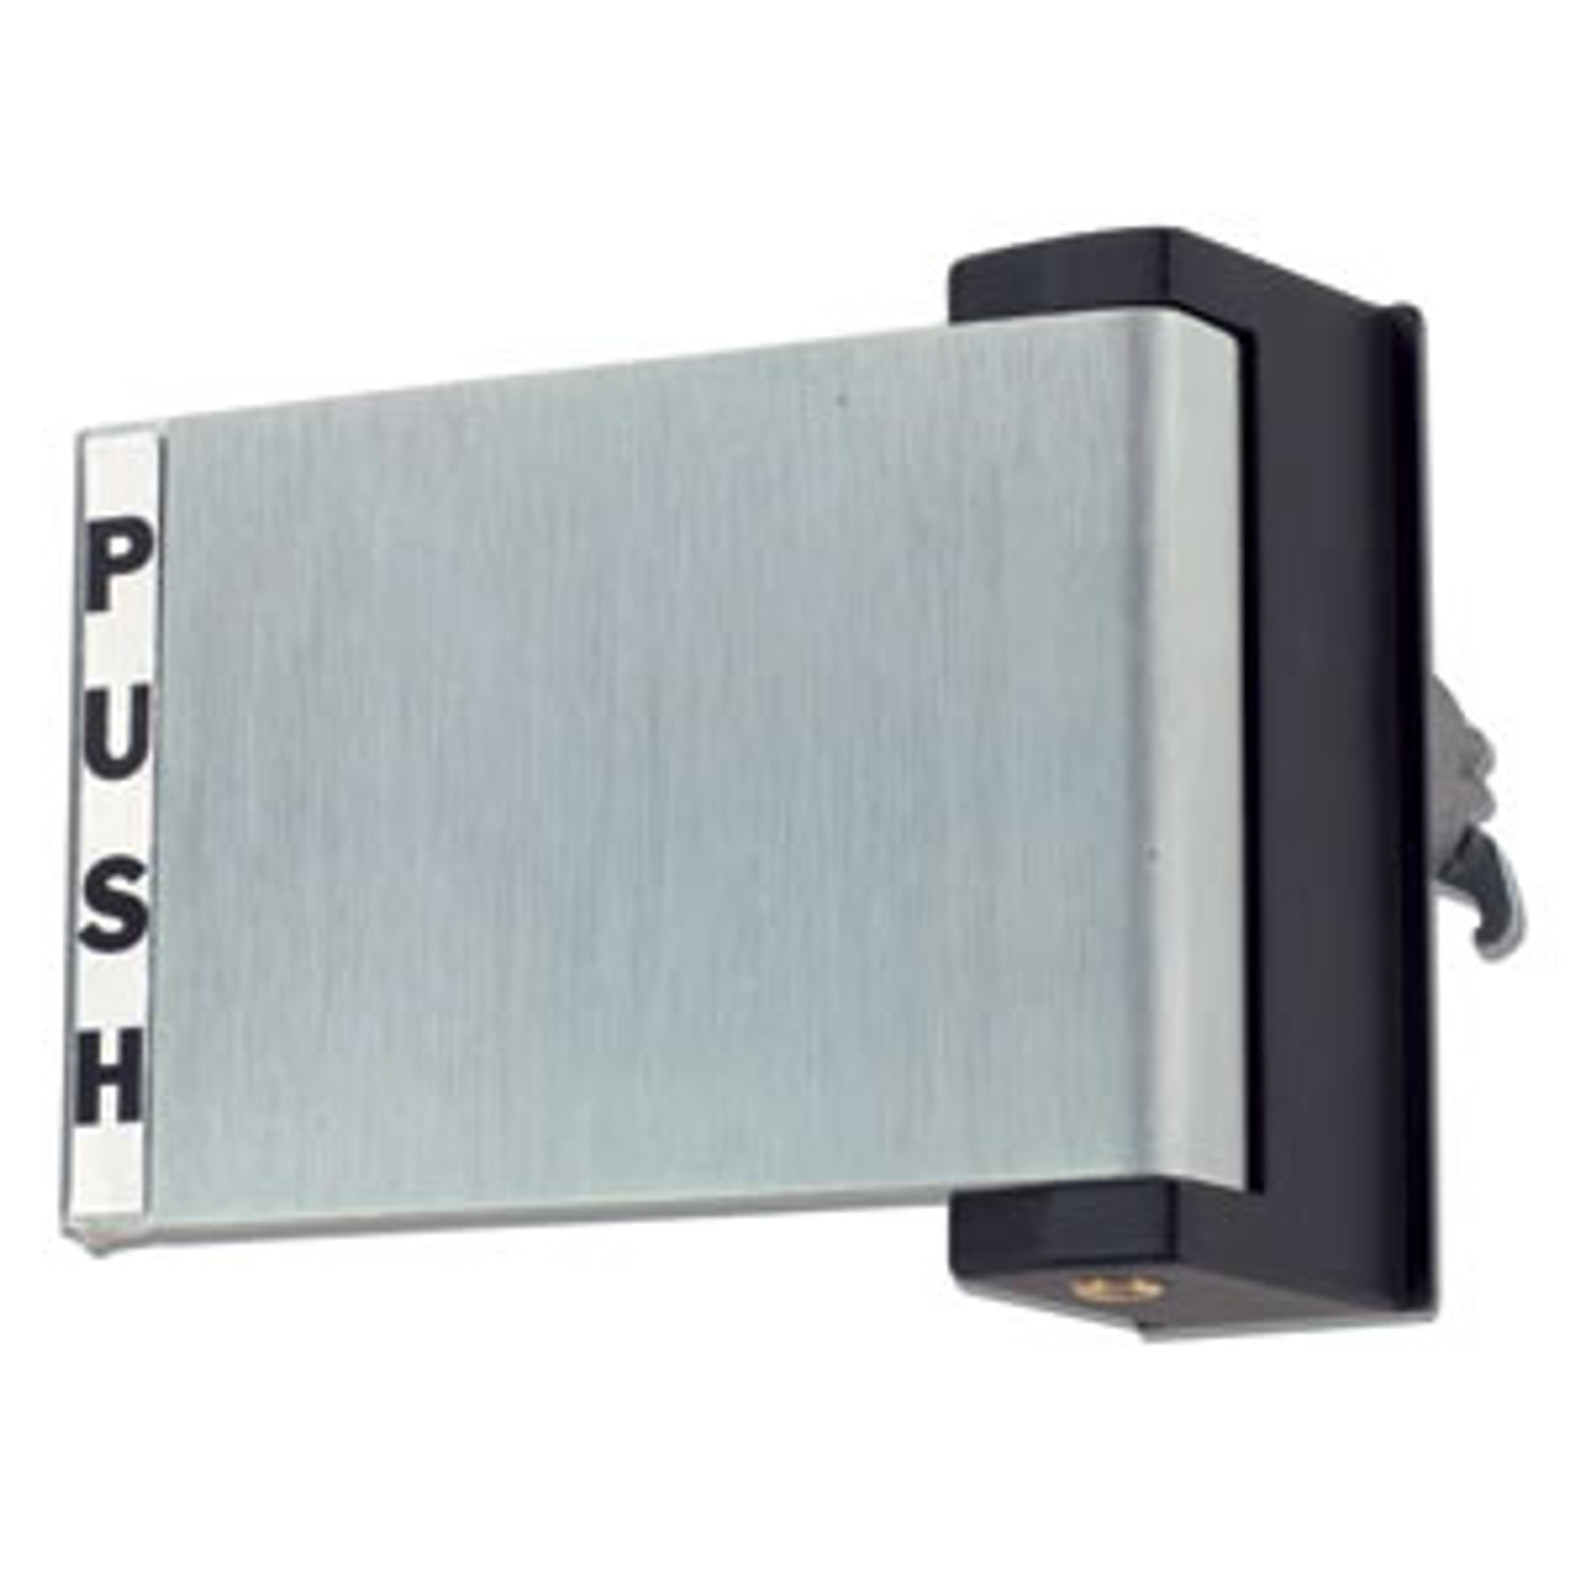 Commercial Door Aluminum Plate-Style Pull Handle, Handlesets